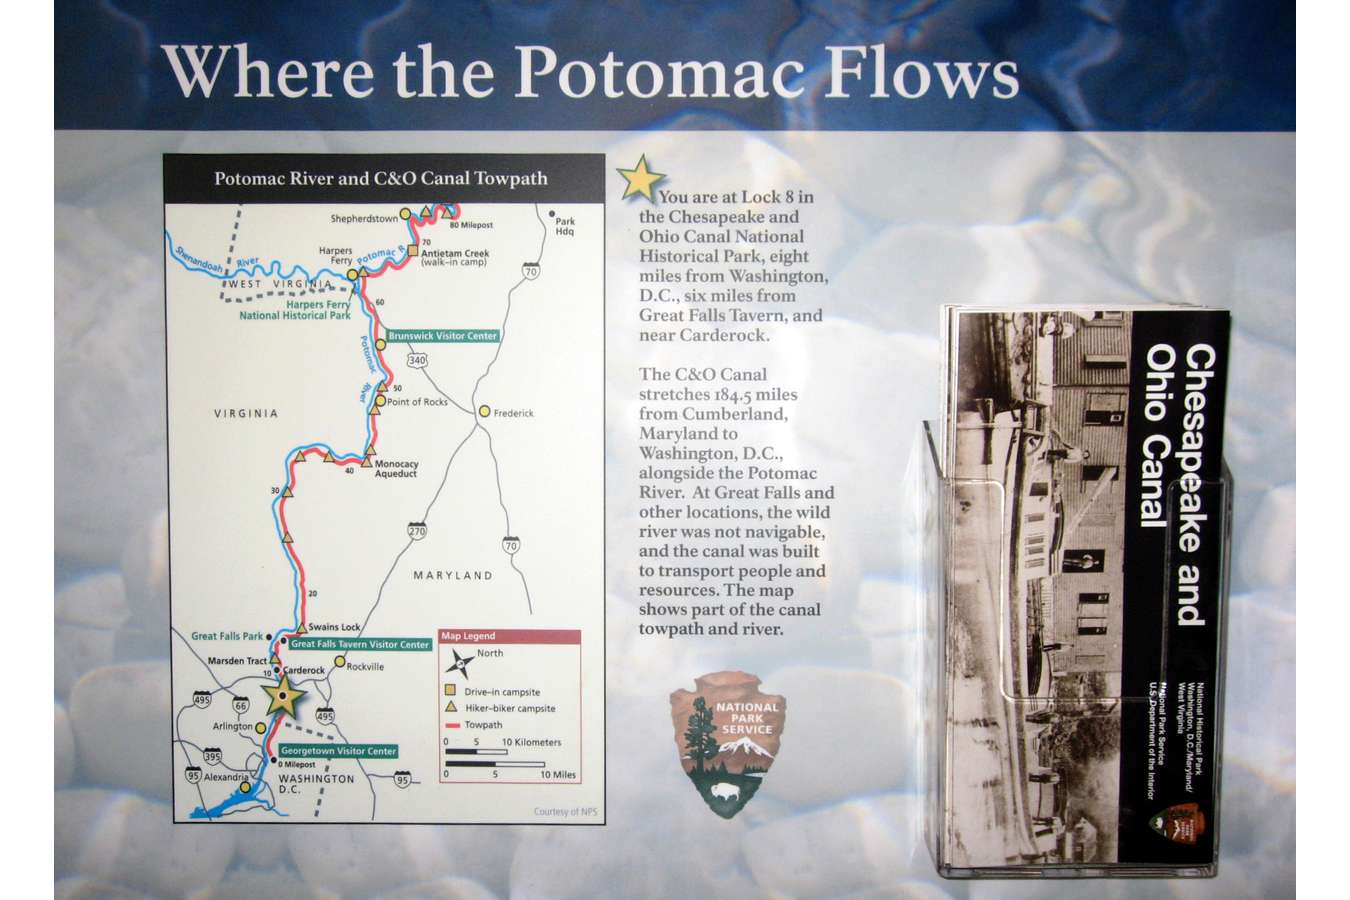 Potcy 1 : The River Center Interprets the Watershed of the Potomac River on the C&O Canal Near D.C.